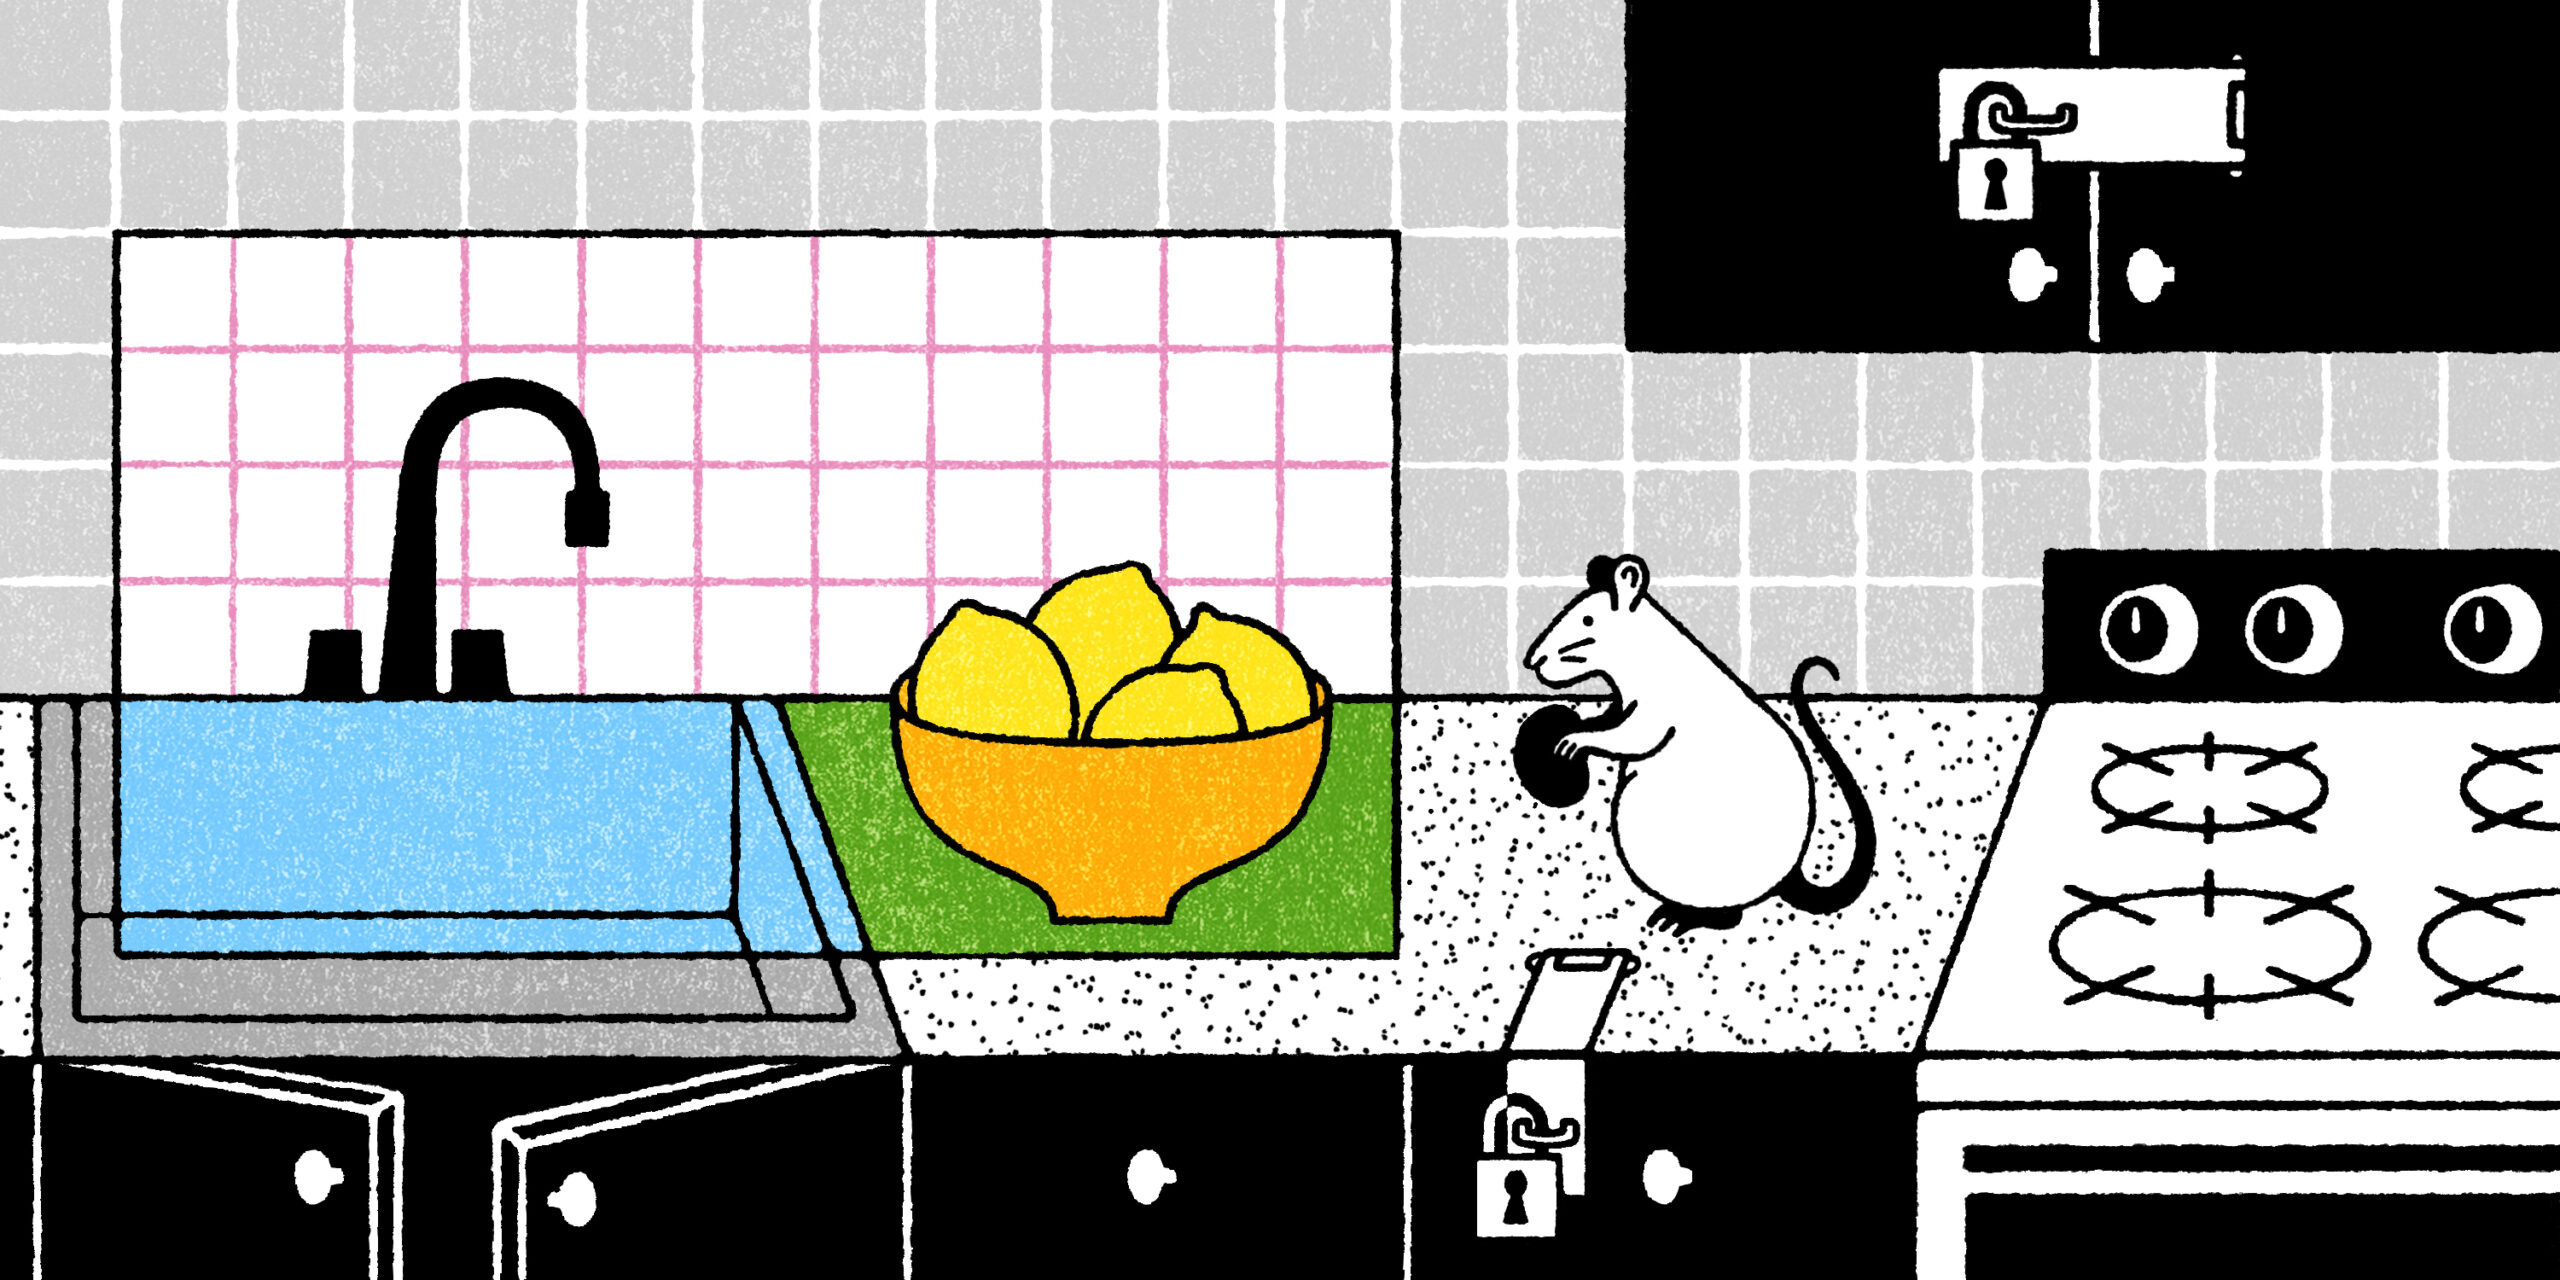 A black and white illustration of a kitchen, with locks on the cupboard and a mouse eating a cracker; a rectangle of the illustration is done is color, showing a bowl of lemons, a blue sink, green counter, and pink checkered wall.